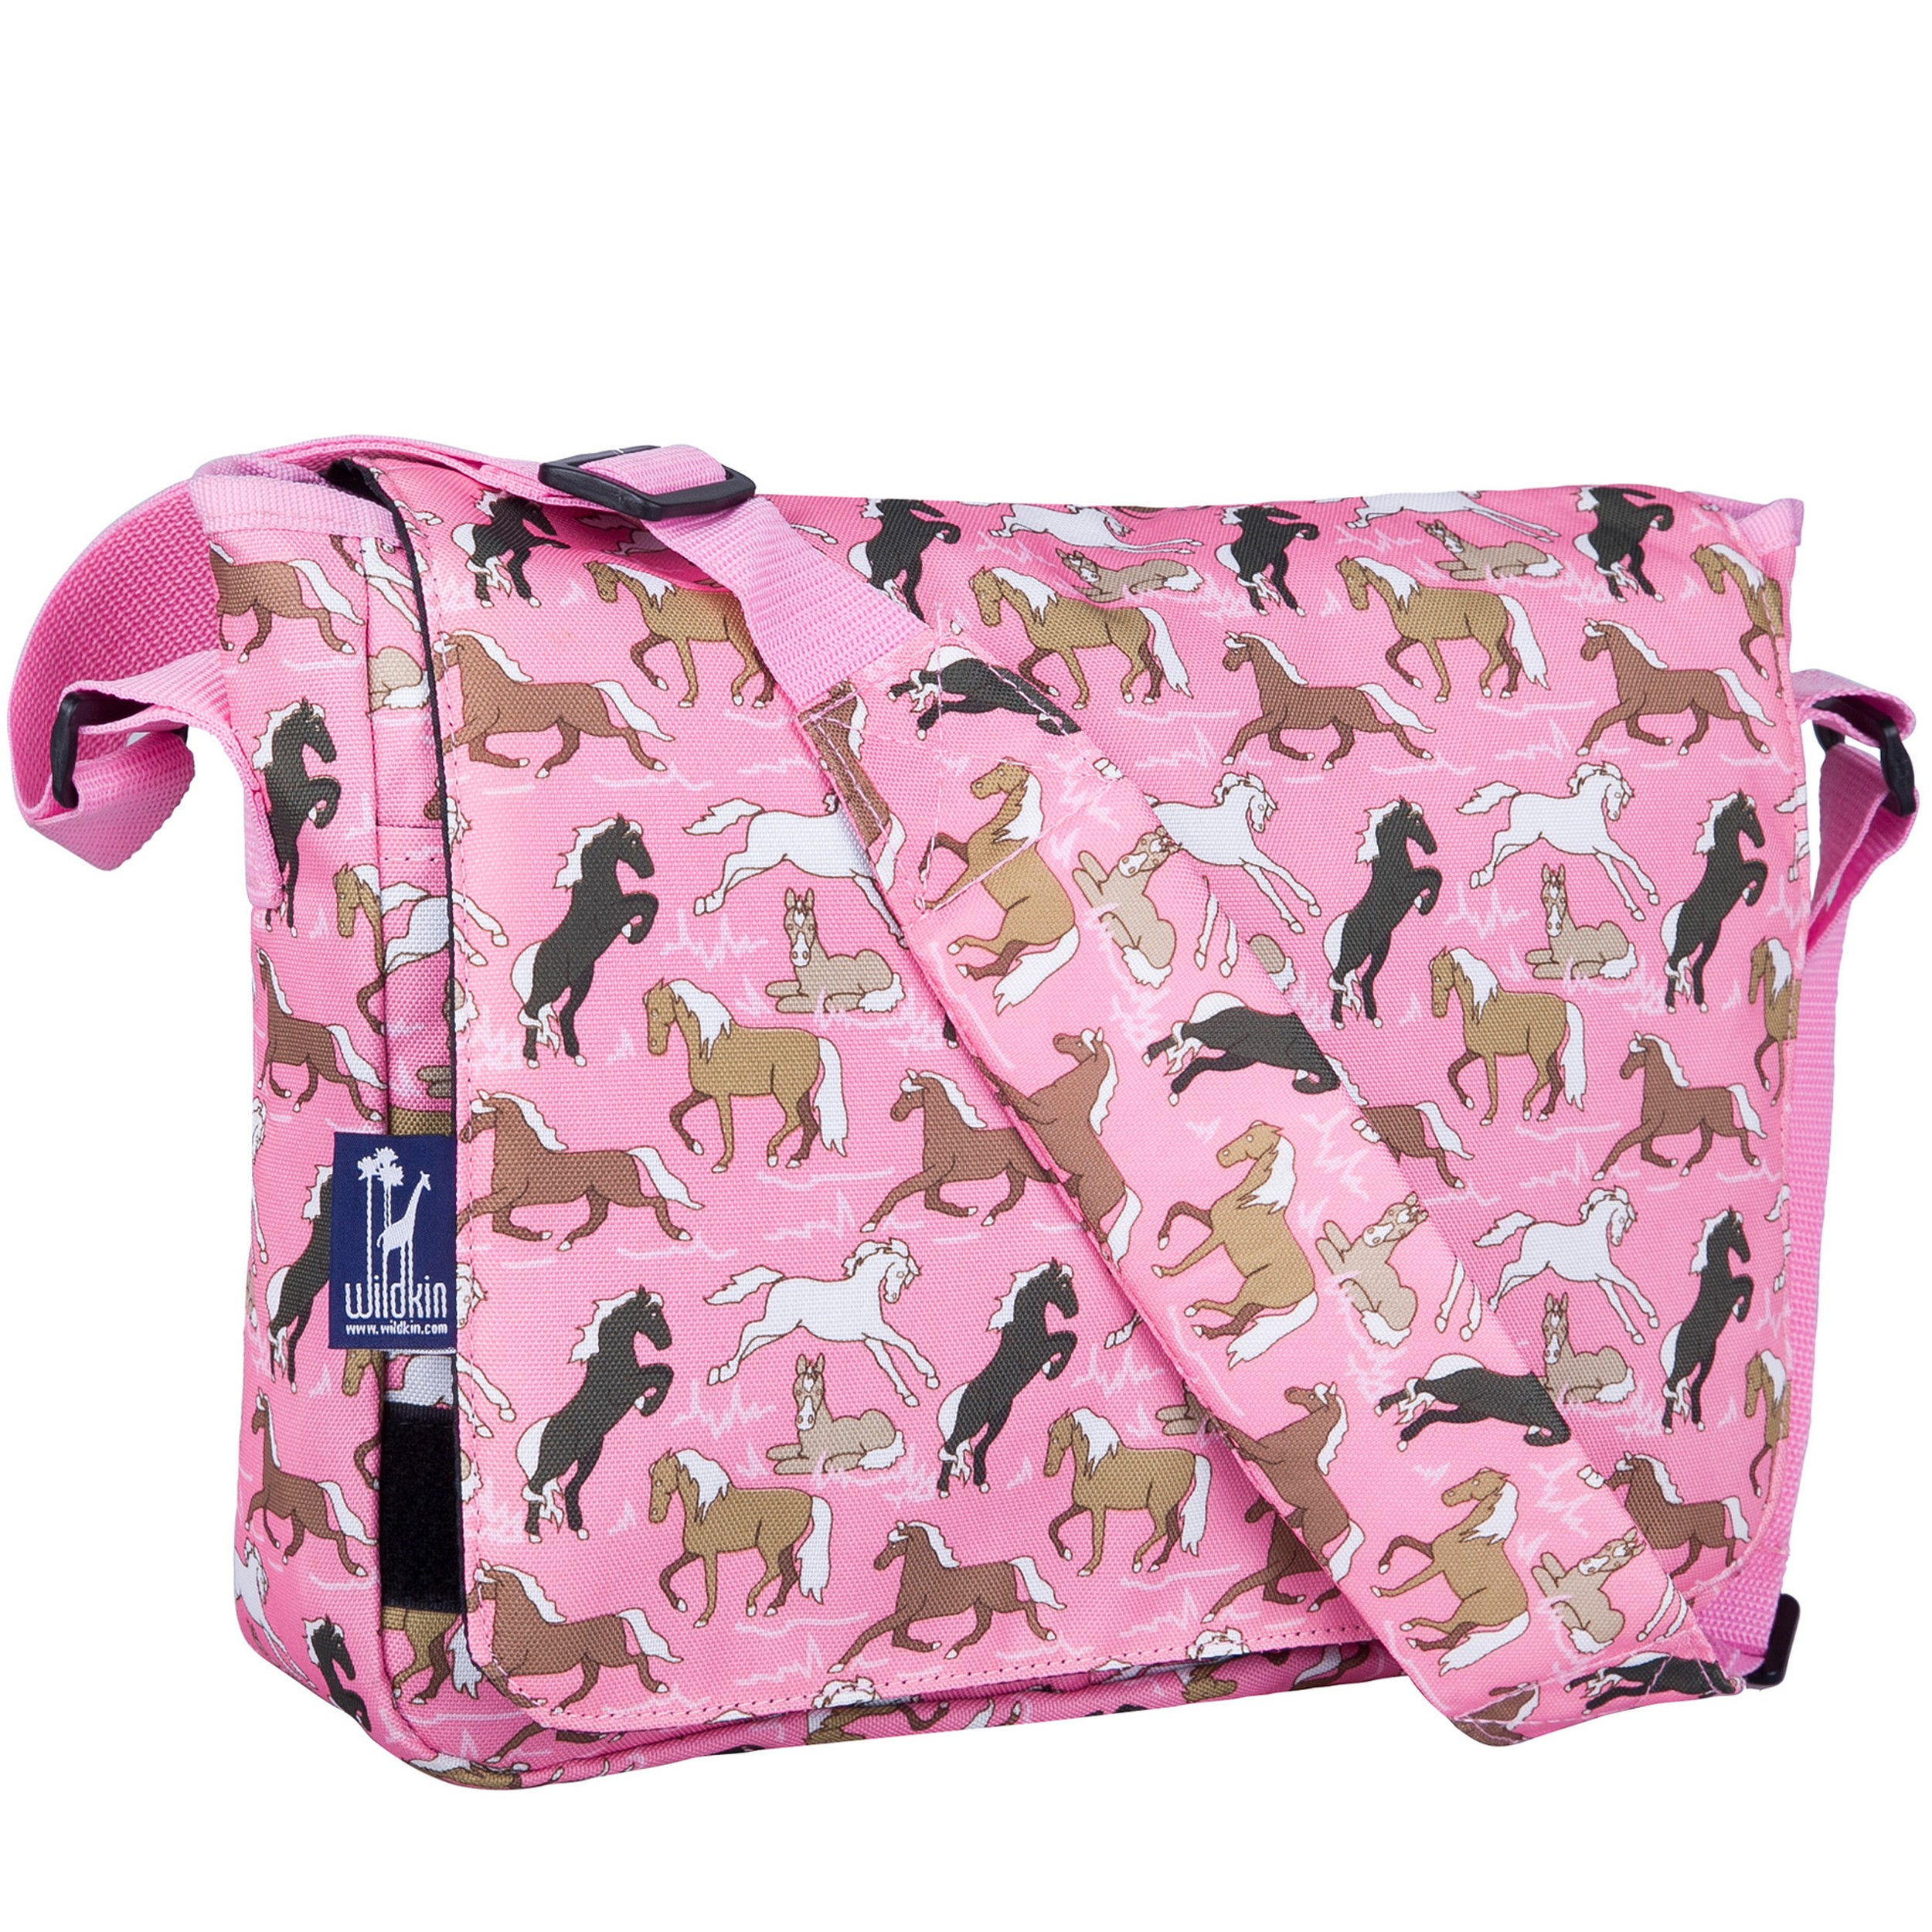 Wildkin Kids Messenger Bag, Perfect for School or Travel, 13 Inch (Horses in Pink) - image 1 of 7